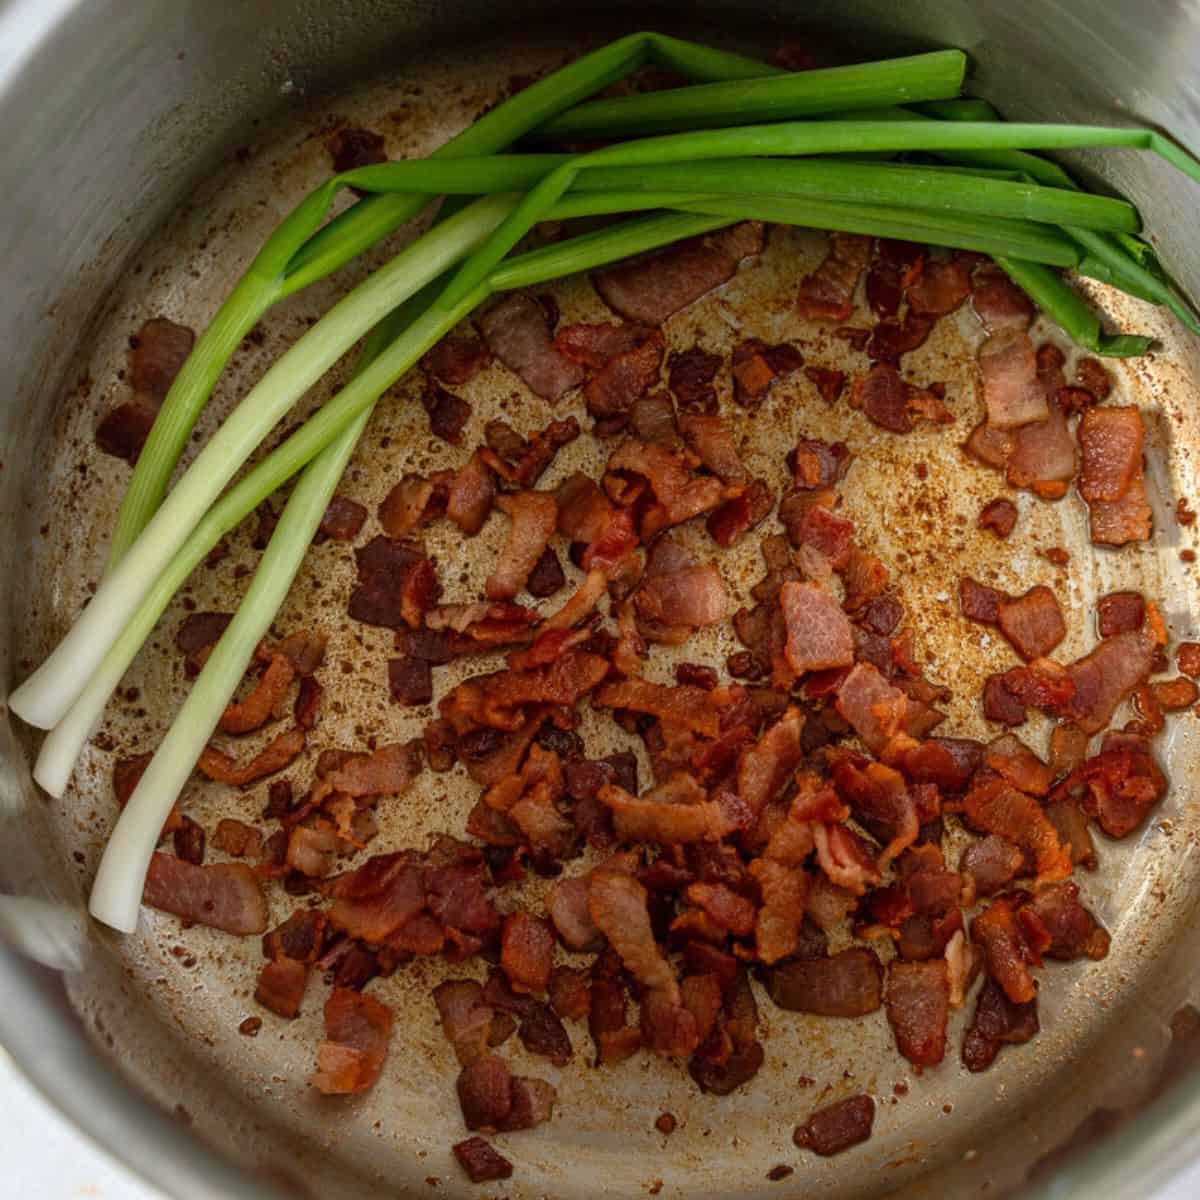 Cooked bacon and green onions in a pot.